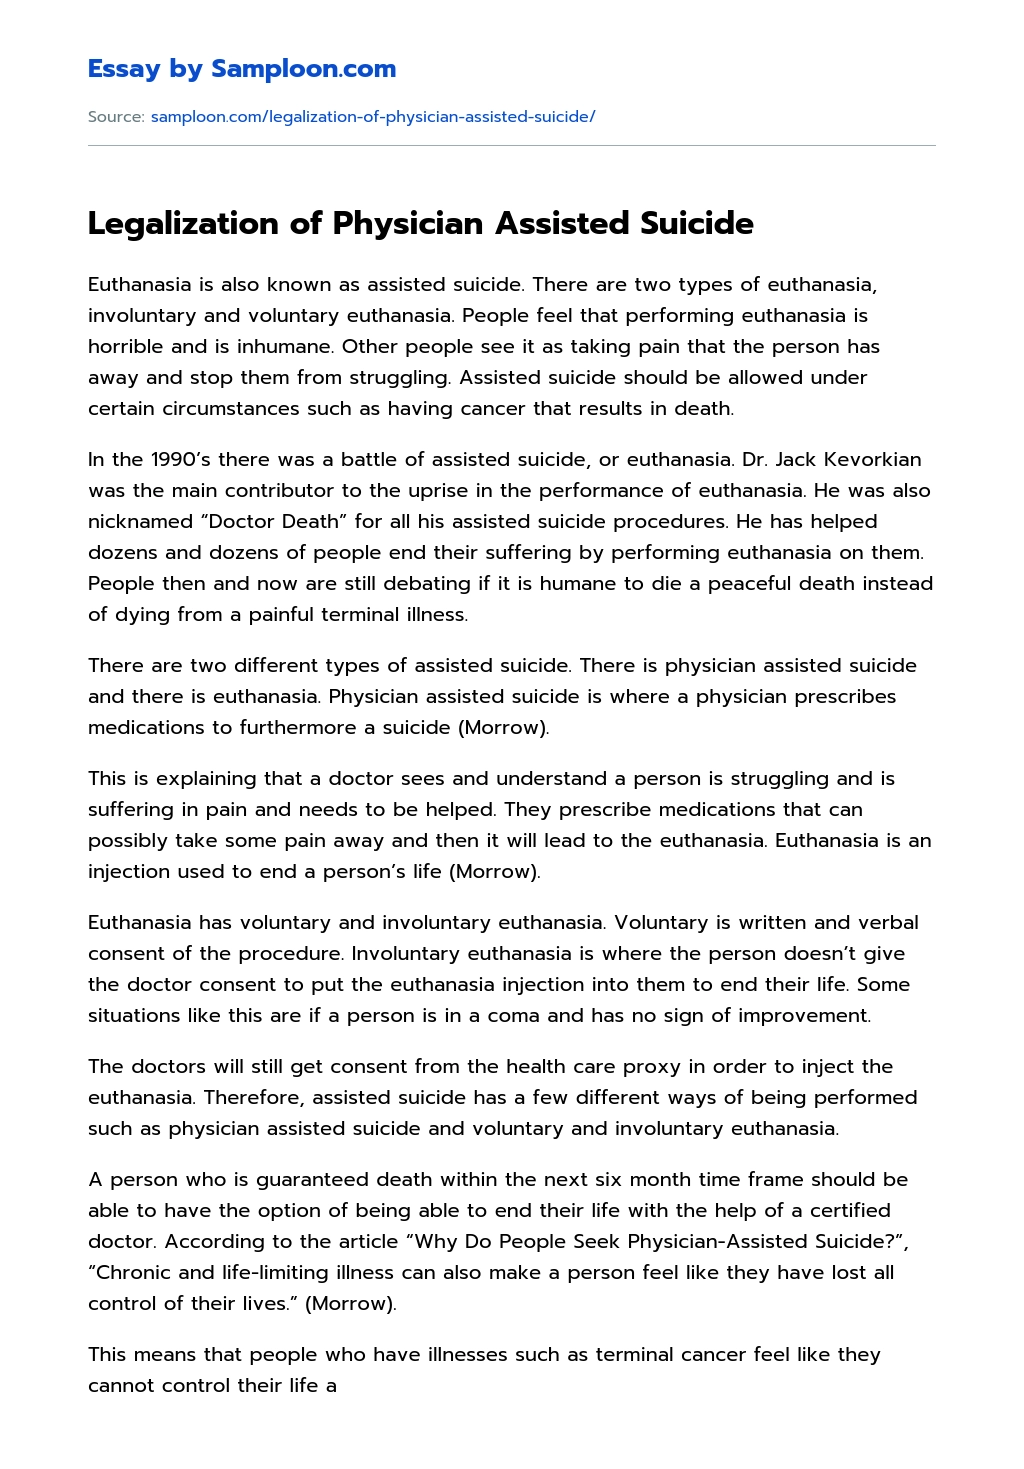 Legalization of Physician Assisted Suicide essay